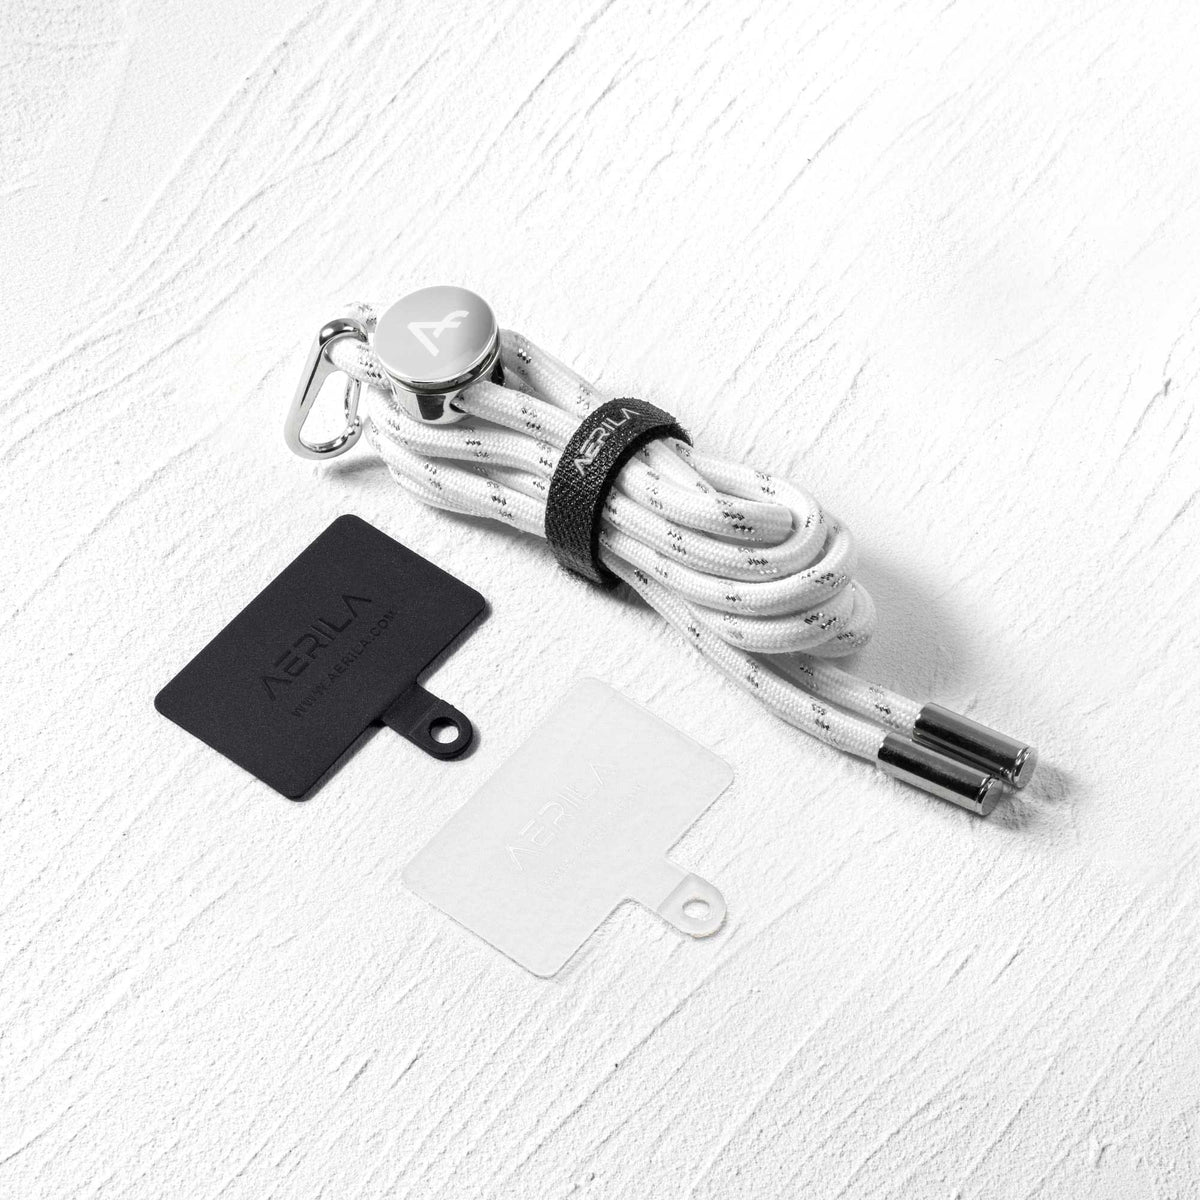 NORE Phone Lanyard set with Connector Patch Card | METALLIC Collection - AERILA